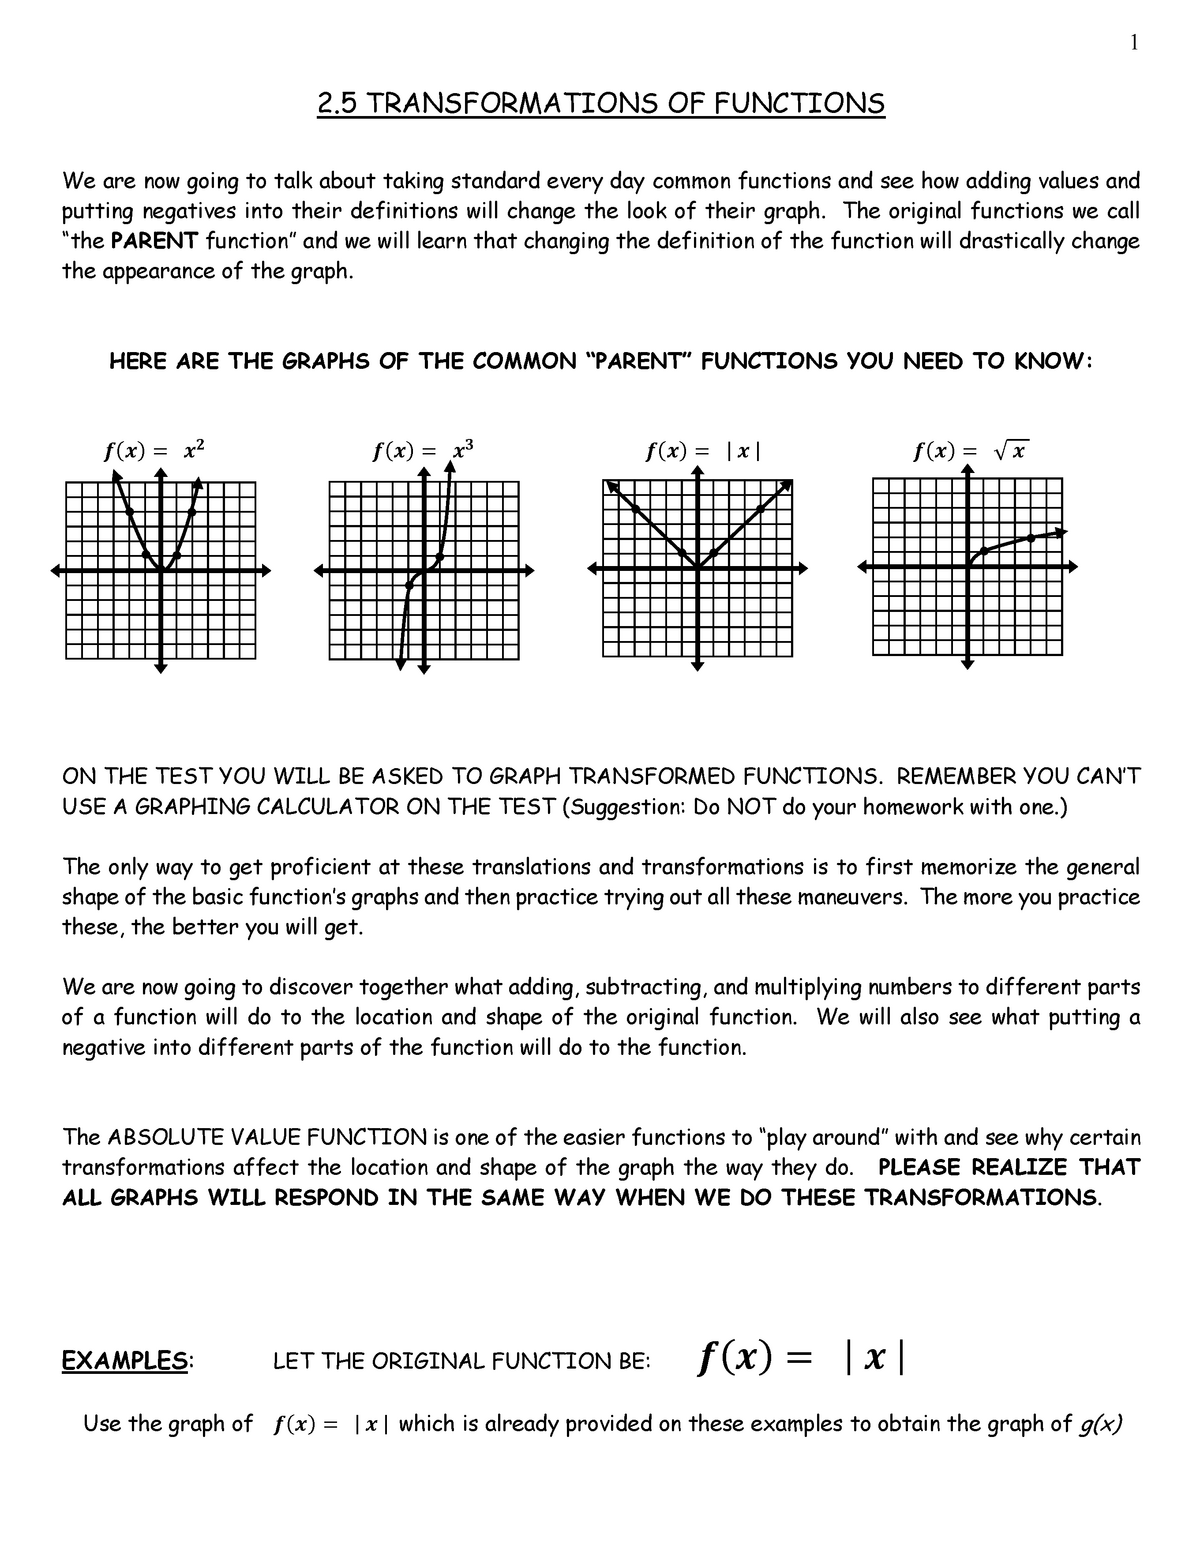 MAC 200 - 20.20 Transformations OF Functions - MAC 200 - College With Transformations Of Functions Worksheet